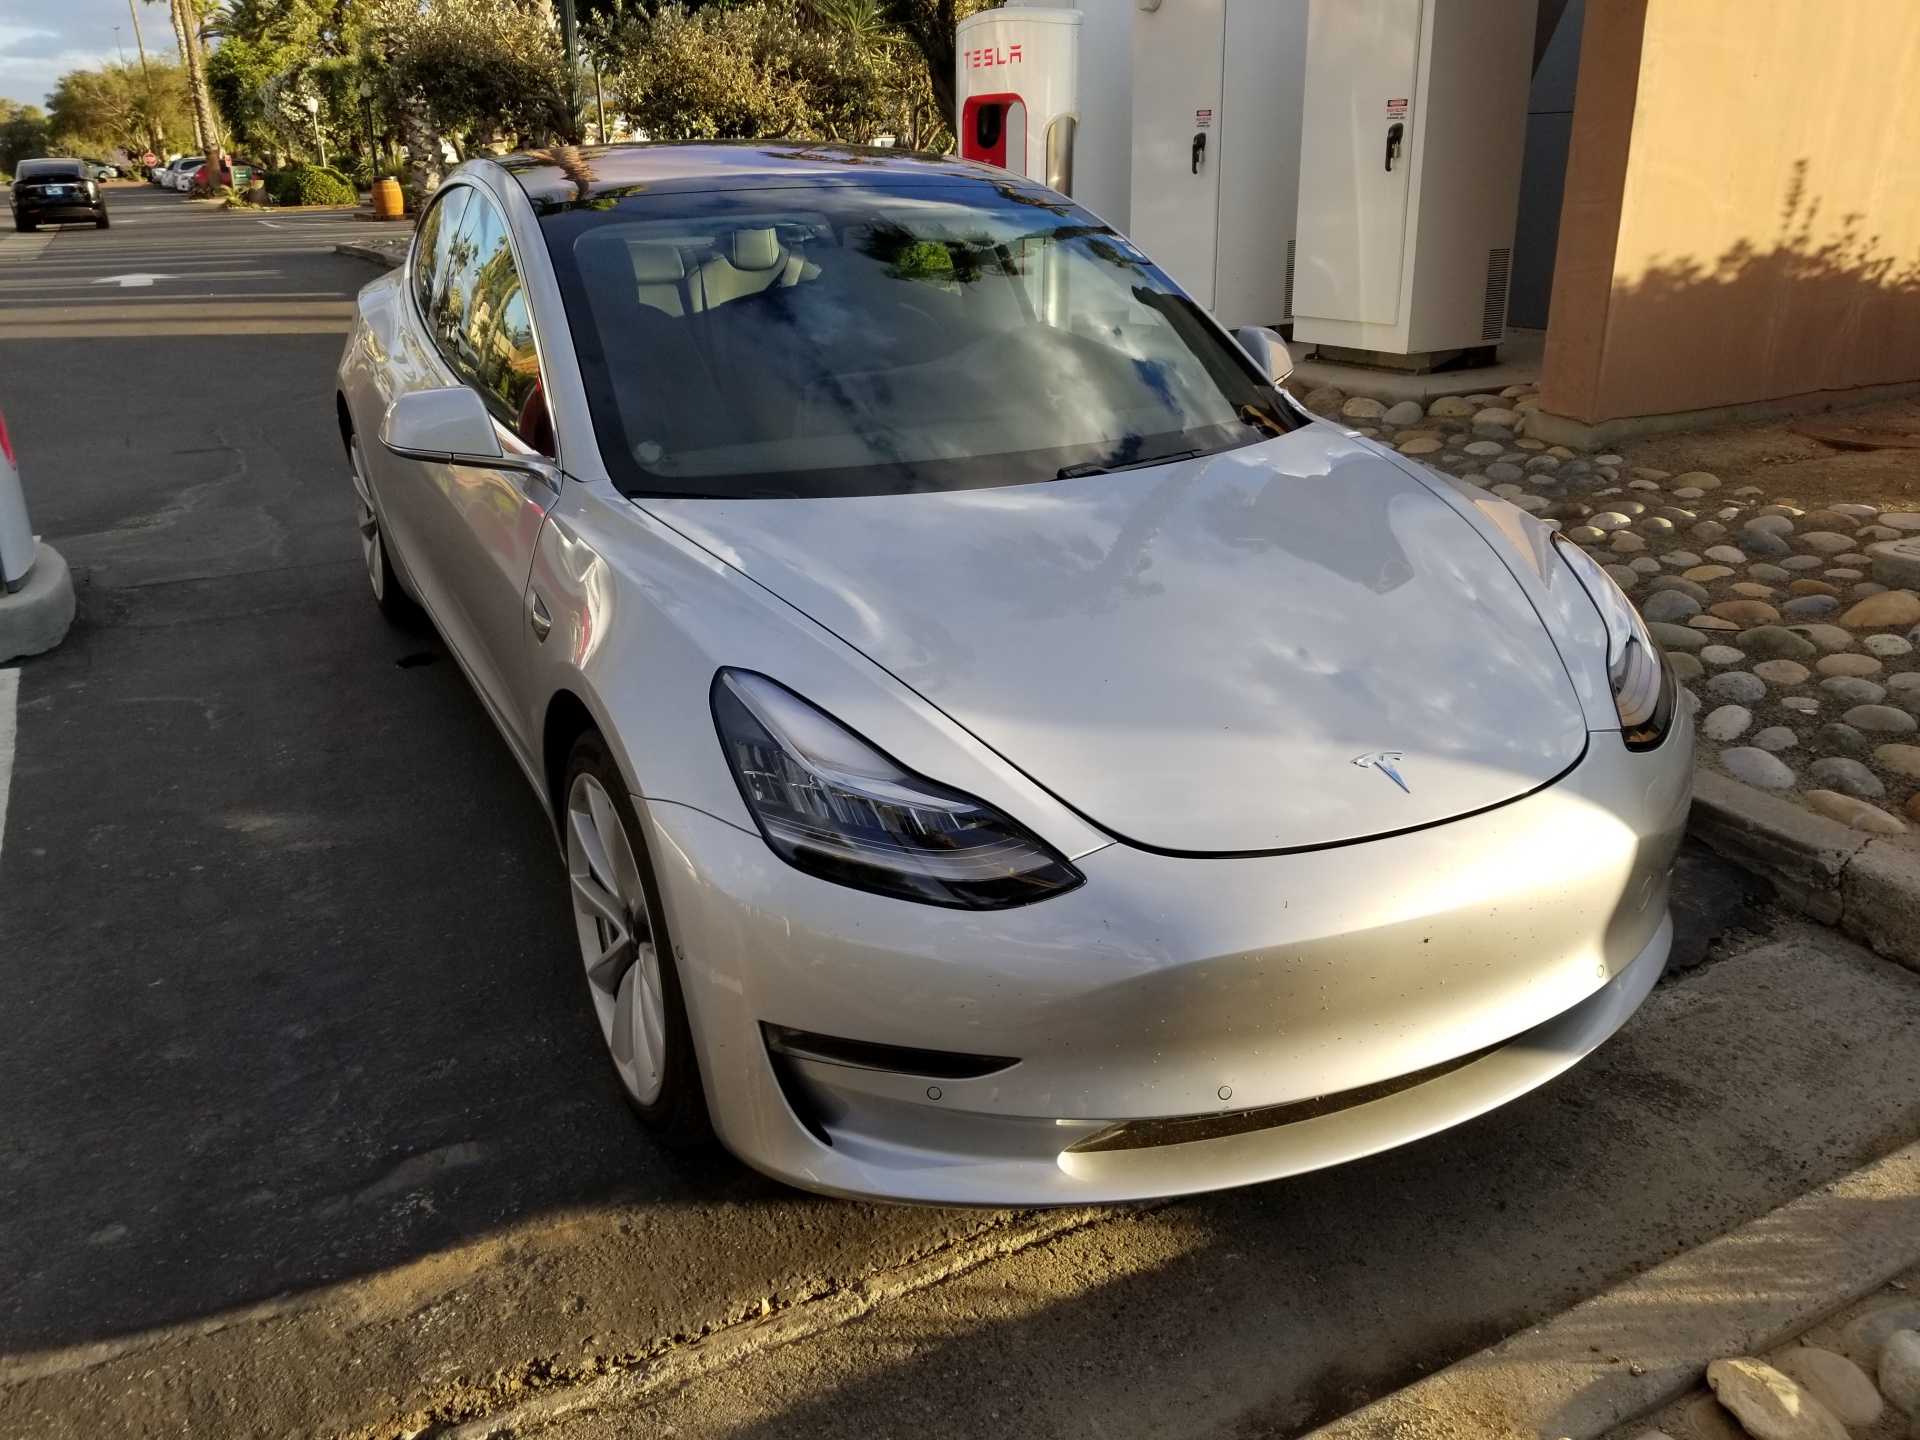 Tesla Model 3 delivery estimator - When will I get my car?